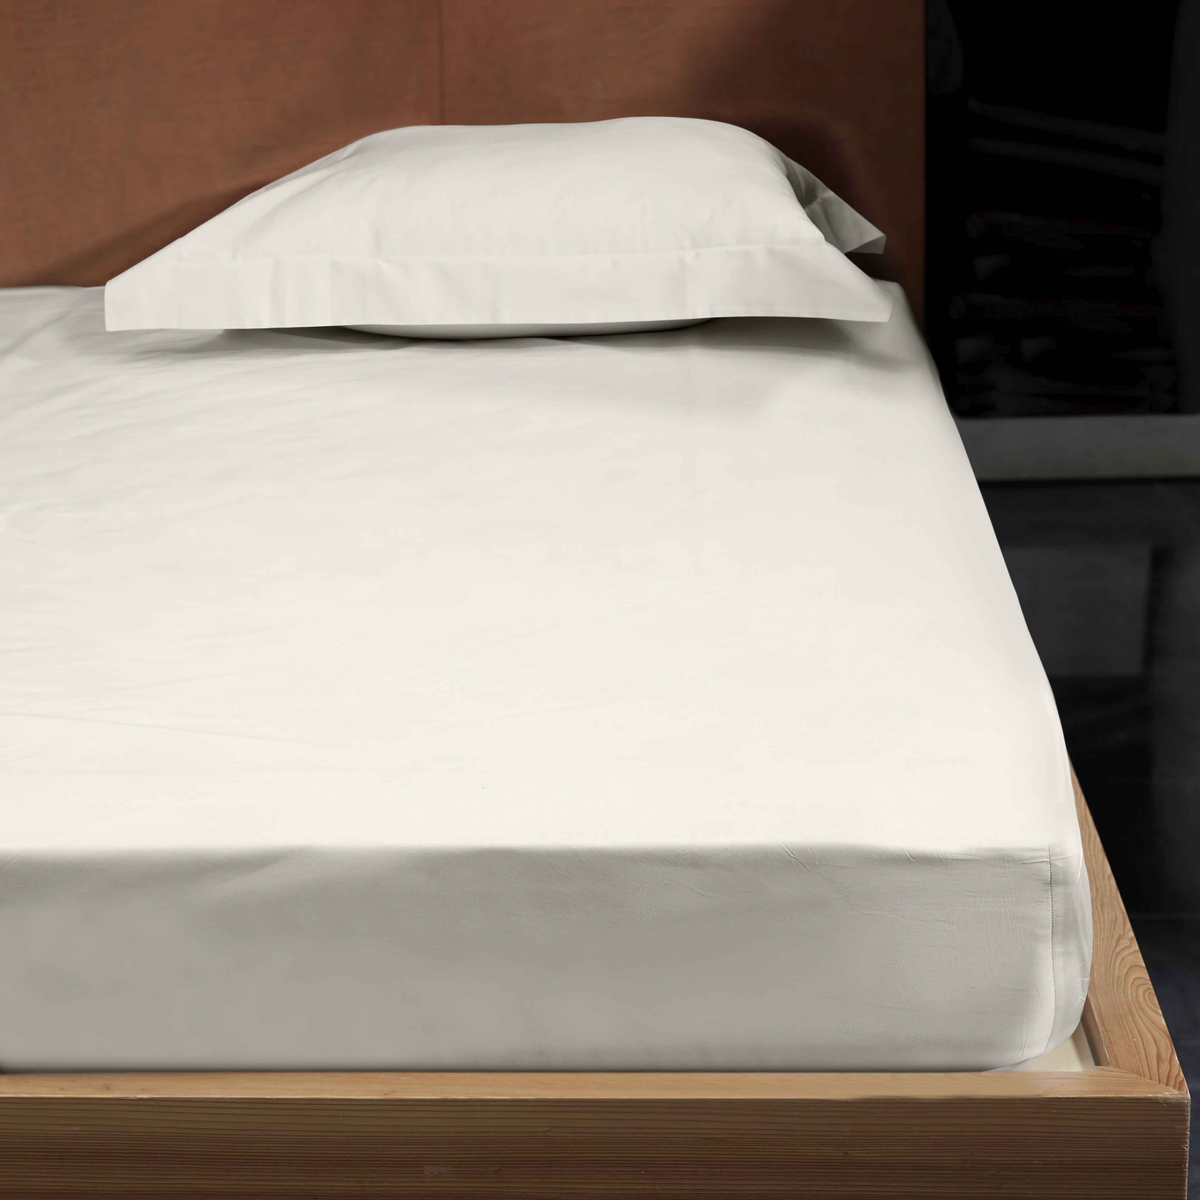 Mattress in Signoria Nuvola Fitted Sheet in Ivory Color